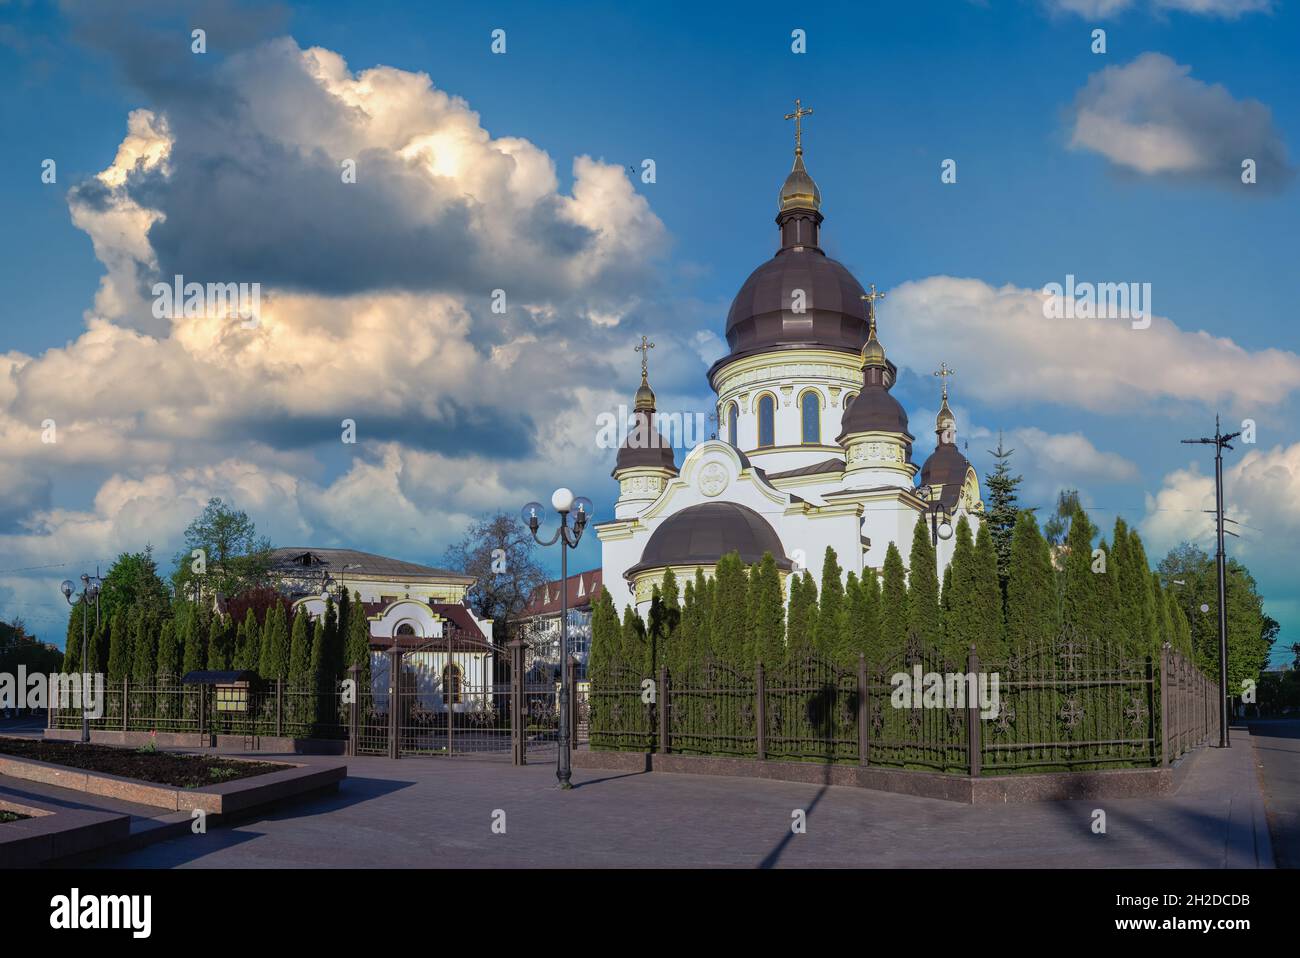 05.09.2021. Kropyvnytskyi, Ukraine. Cathedral Church of the Annunciation of the Most Holy Theotokos in Kropyvnytskyi, Ukraine, on a sunny spring morni Stock Photo